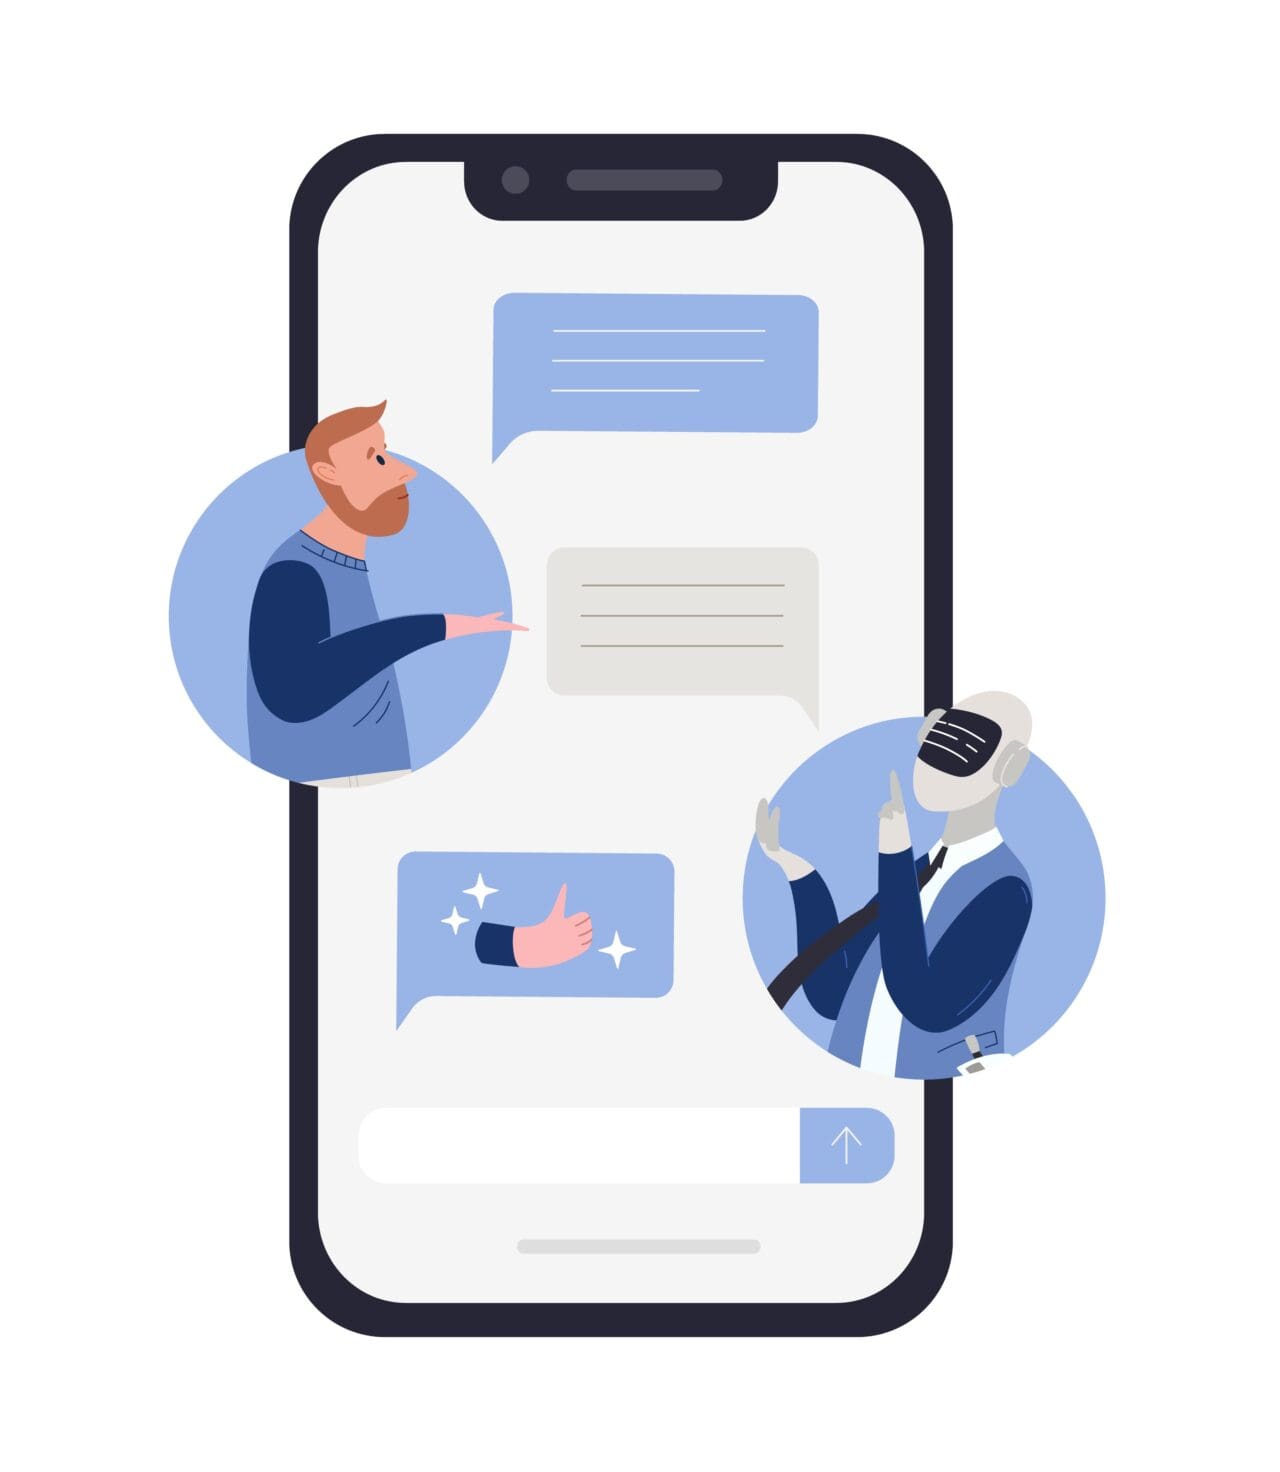 Bearded man talking to robot or android and chat messages on smartphone screen. Concept of chatbot conversation, technical support service. Colorful vector illustration in flat cartoon style.